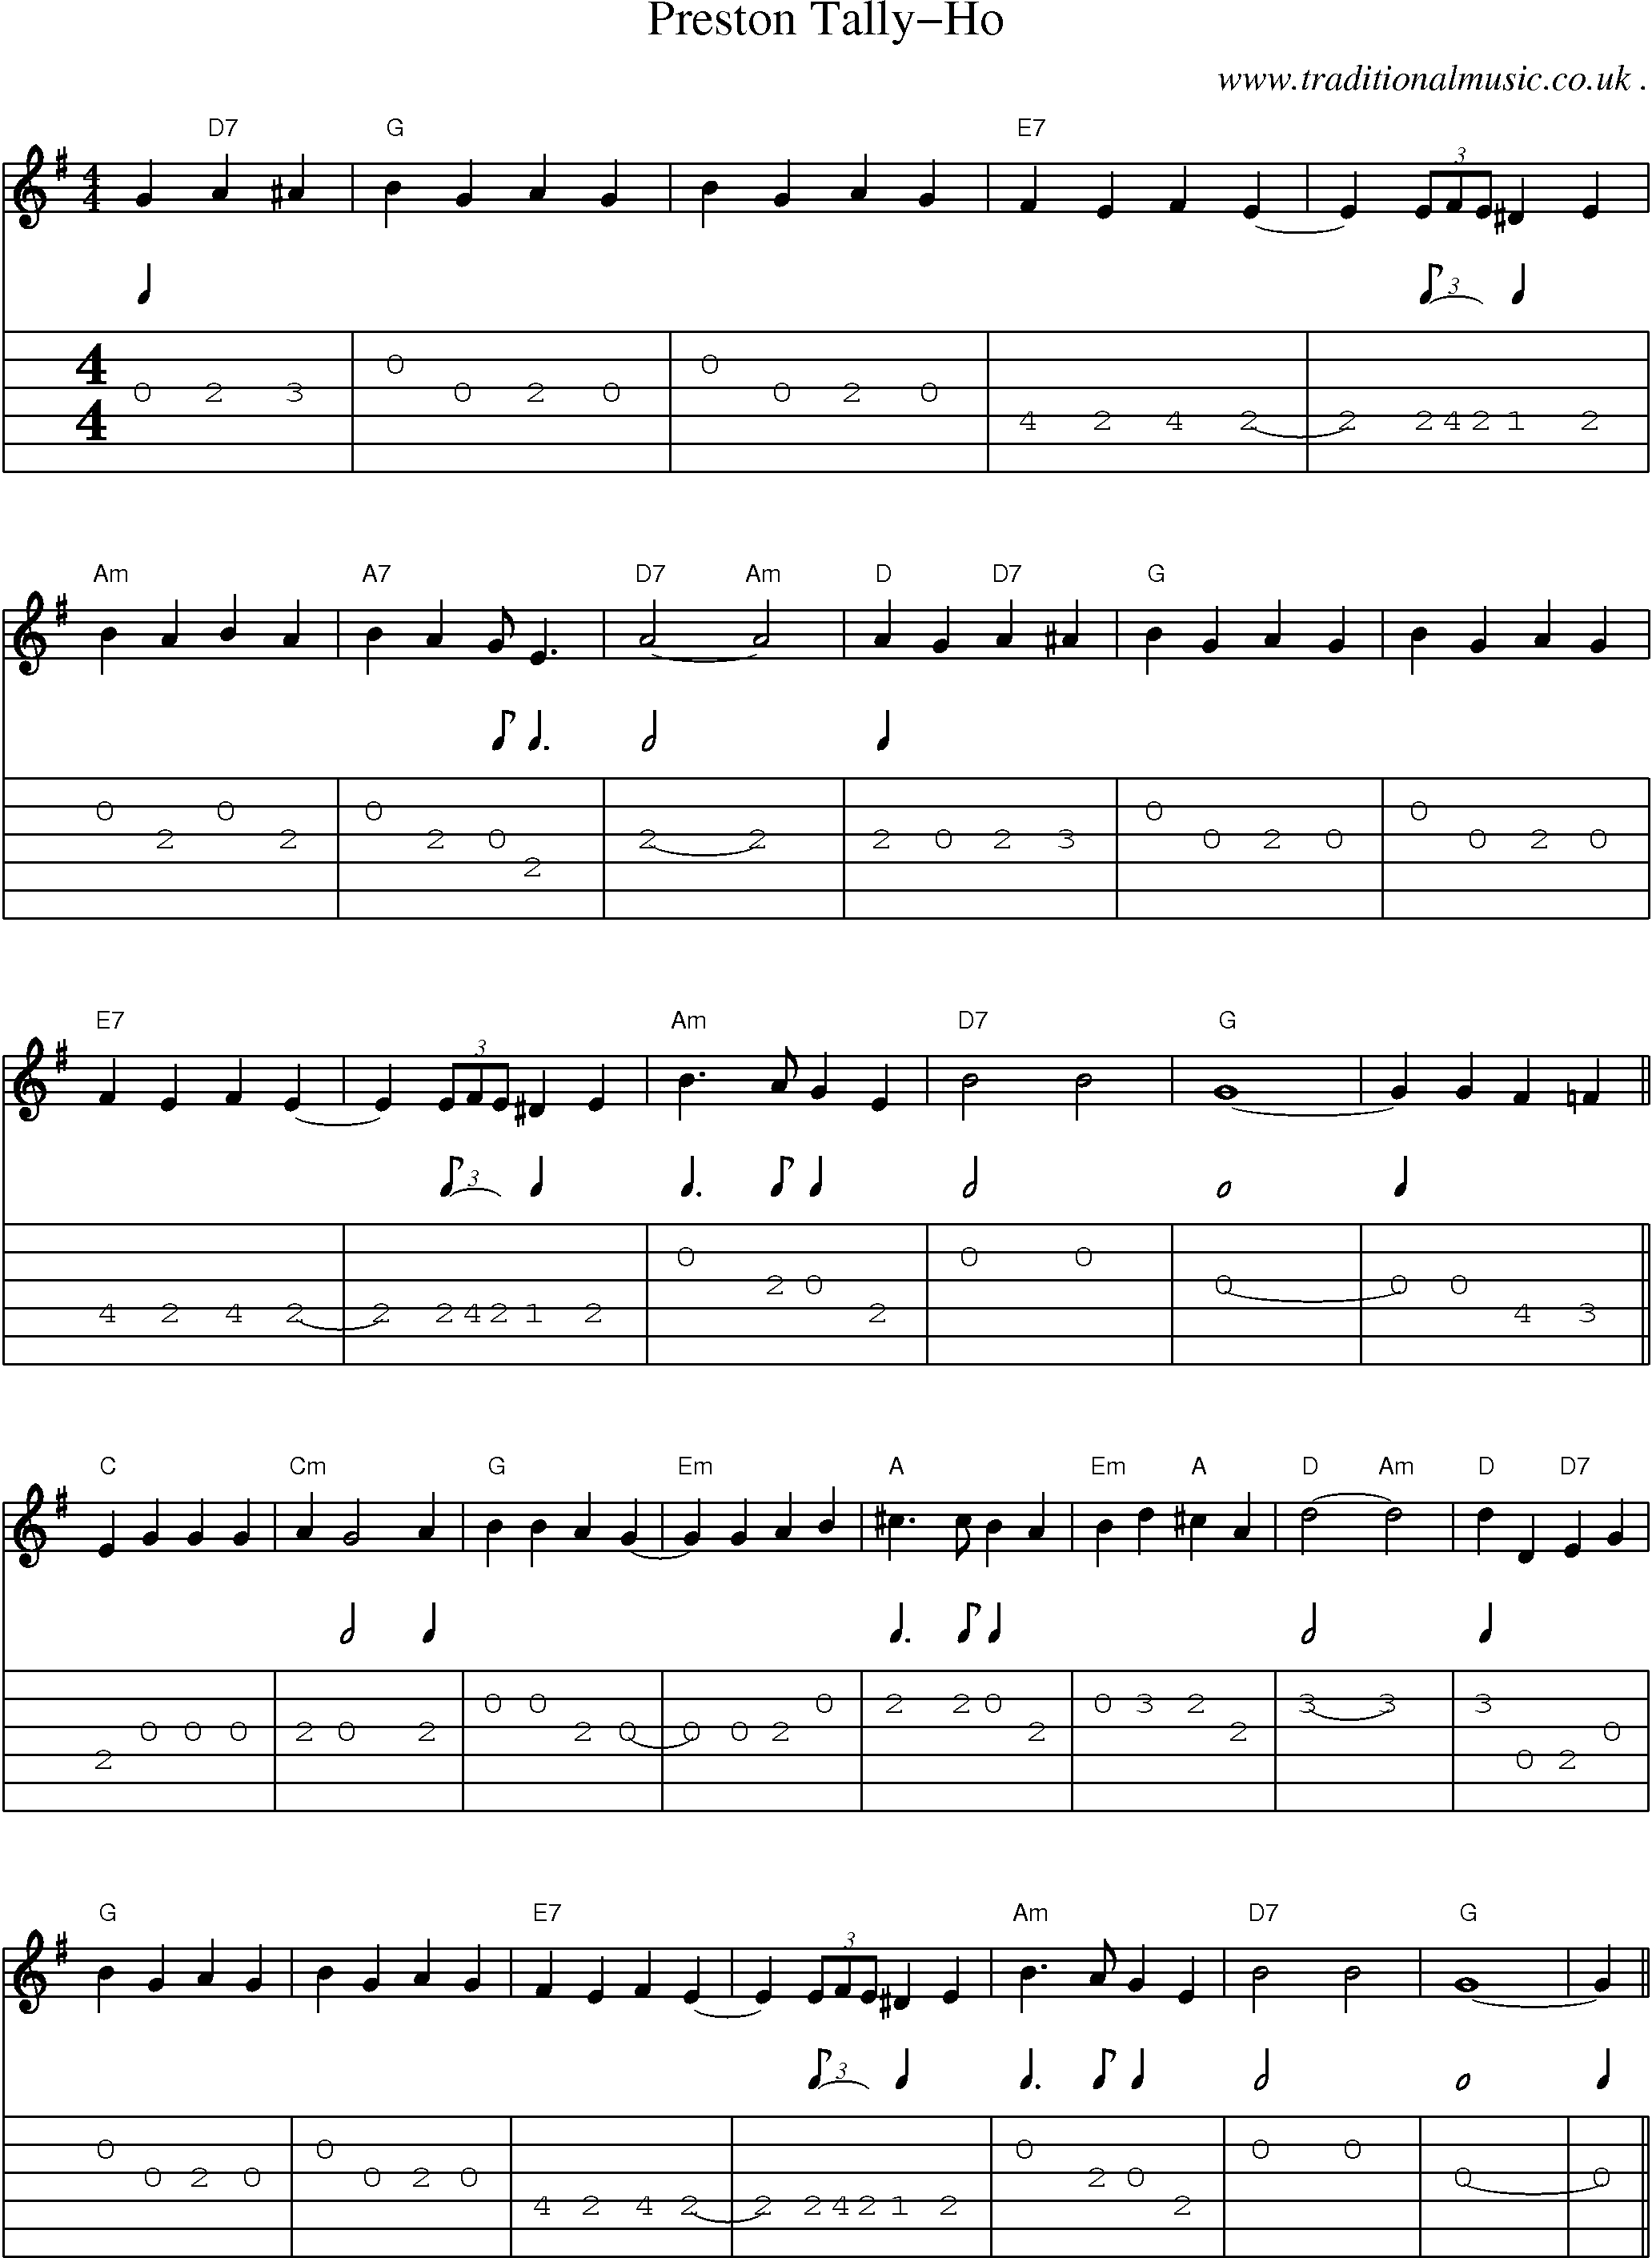 Sheet-Music and Guitar Tabs for Preston Tally-ho